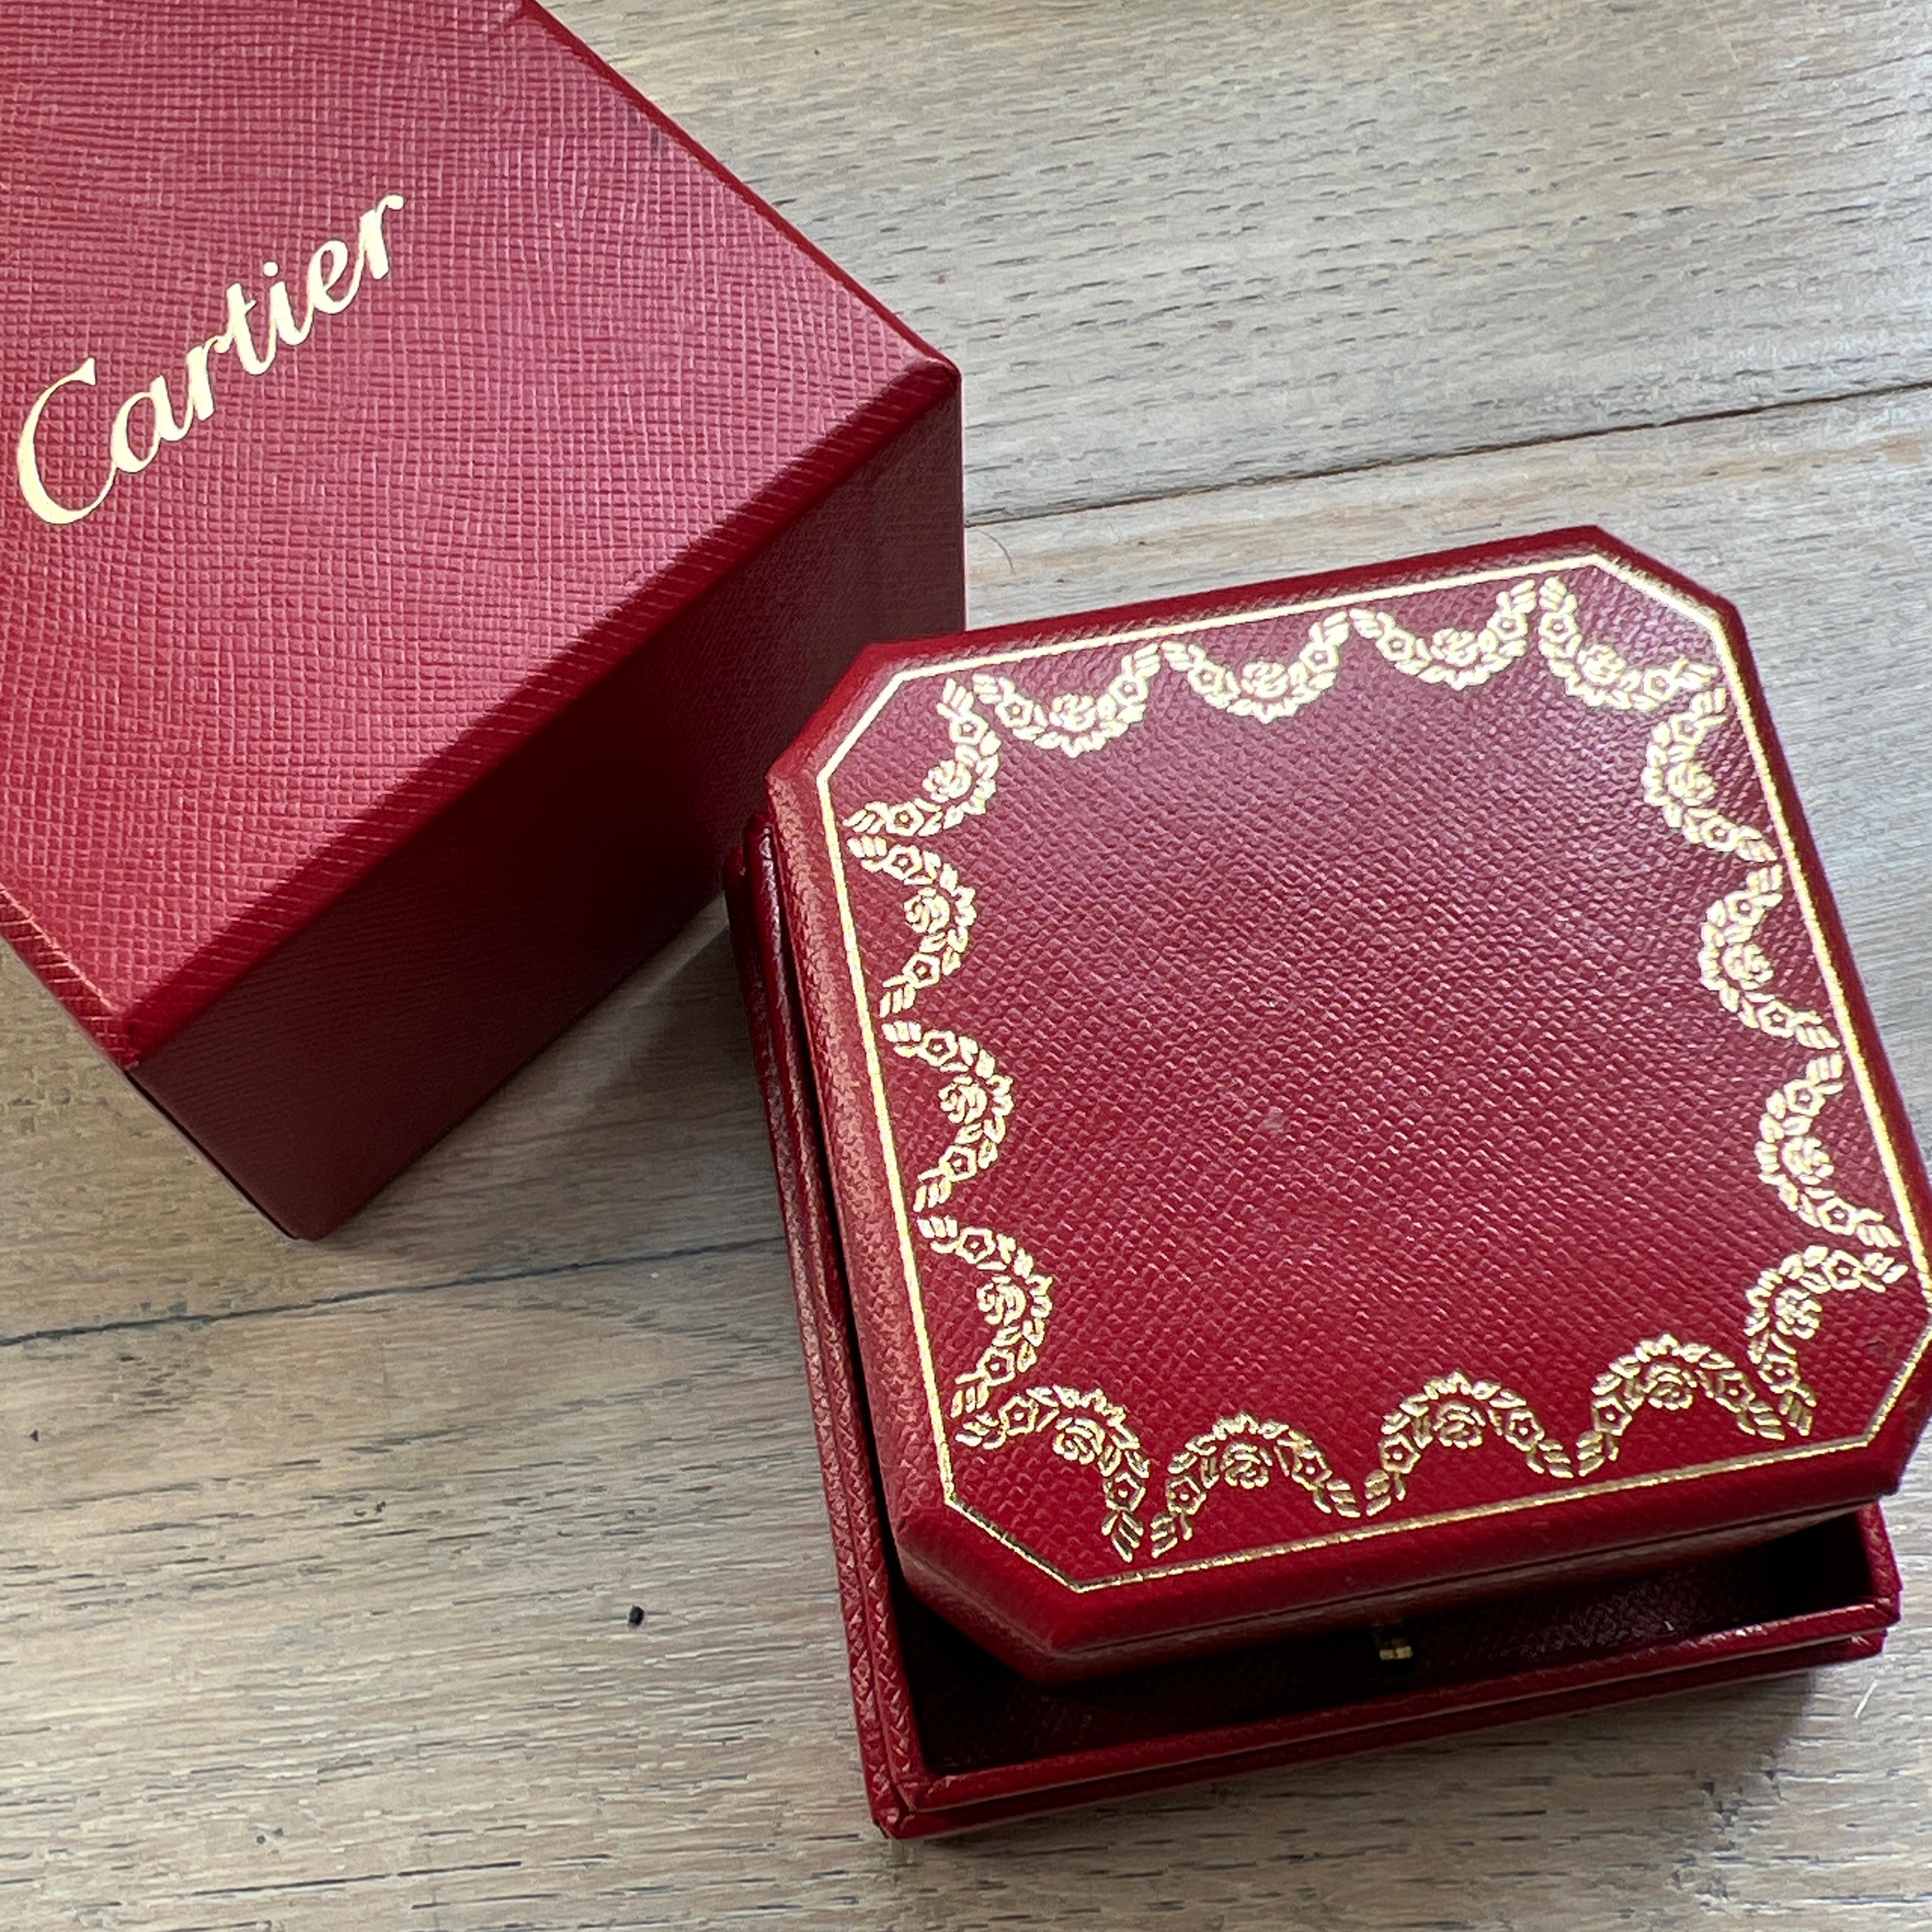 Cartier Original 1992 Oval Ruby 18 Karat Yellow Gold Ellipse Ring For Sale 6